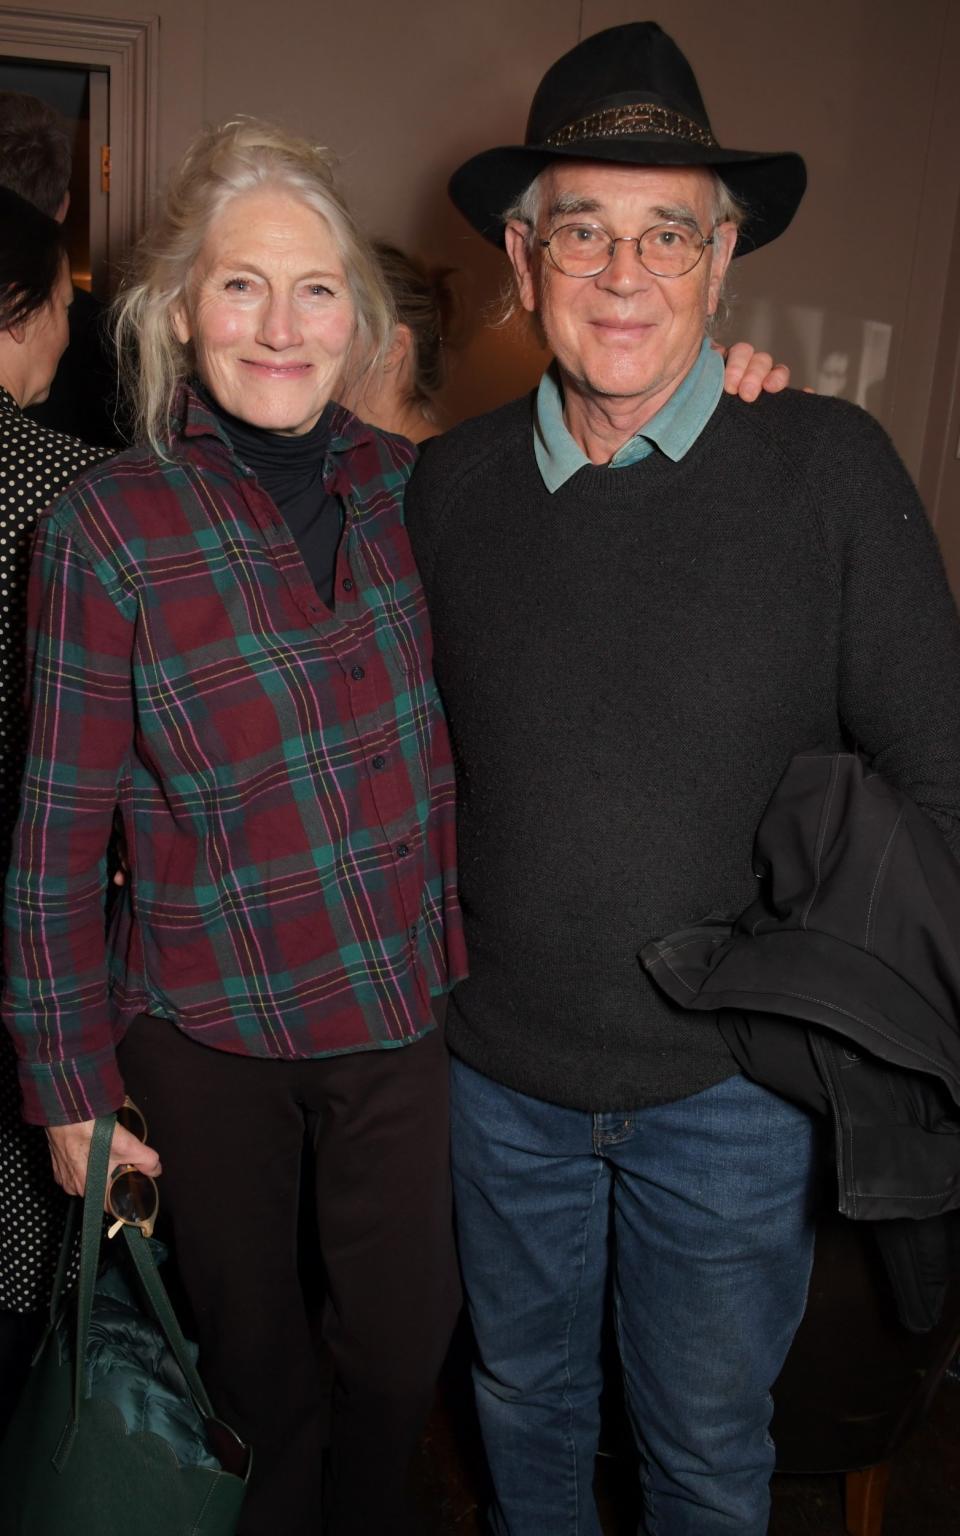 James and her director husband Joseph Blatchley - Dave Benett/Getty Images for Netflix